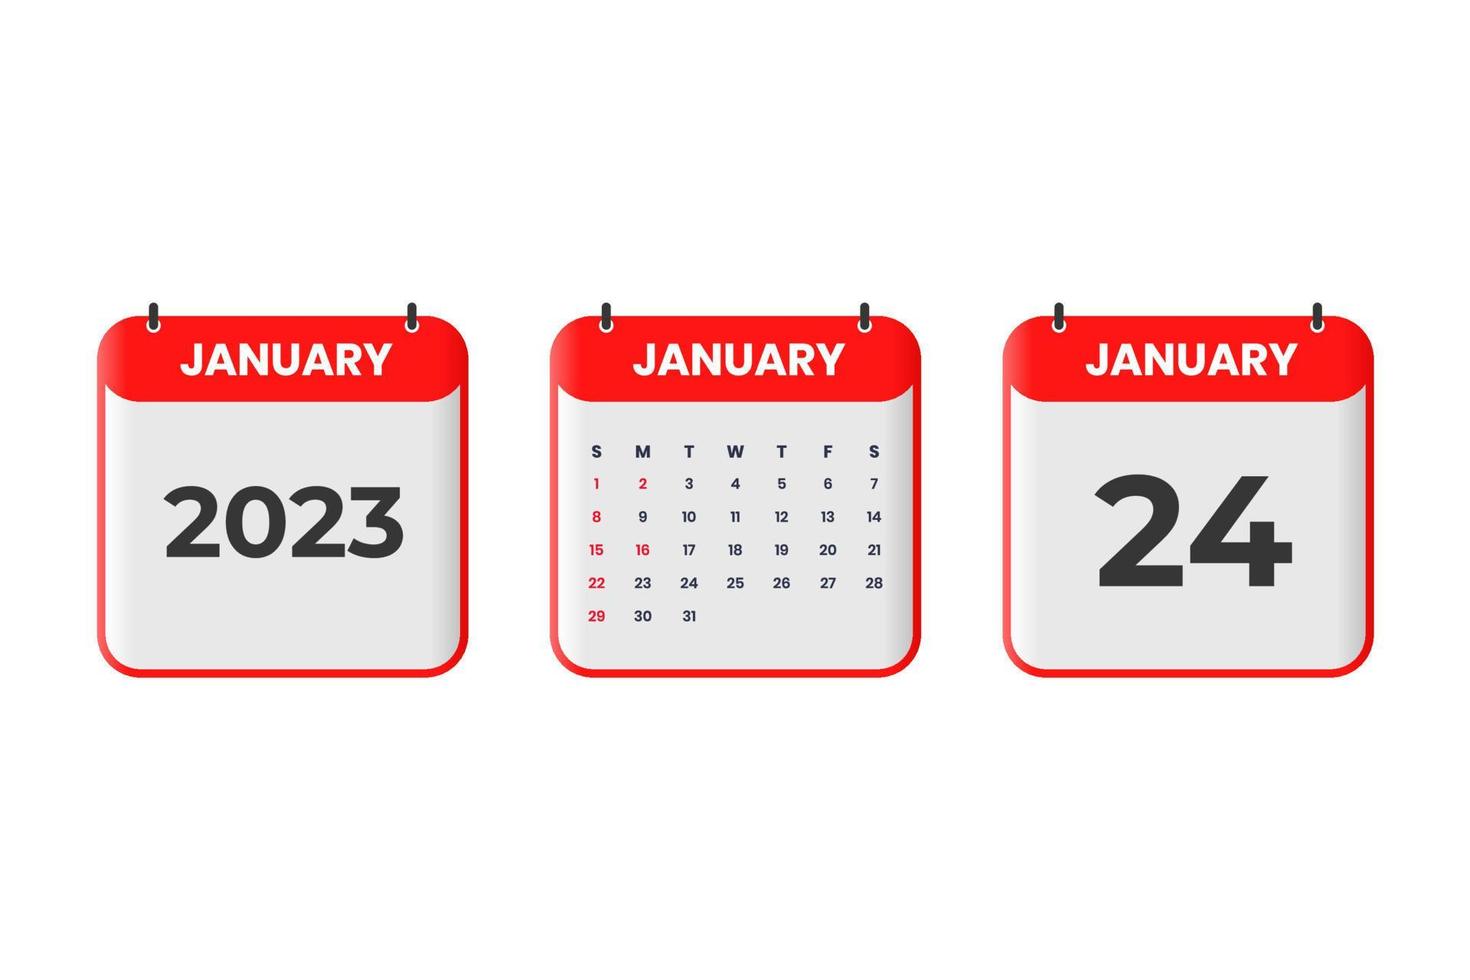 January 2023 calendar design. 24th January 2023 calendar icon for schedule, appointment, important date concept vector